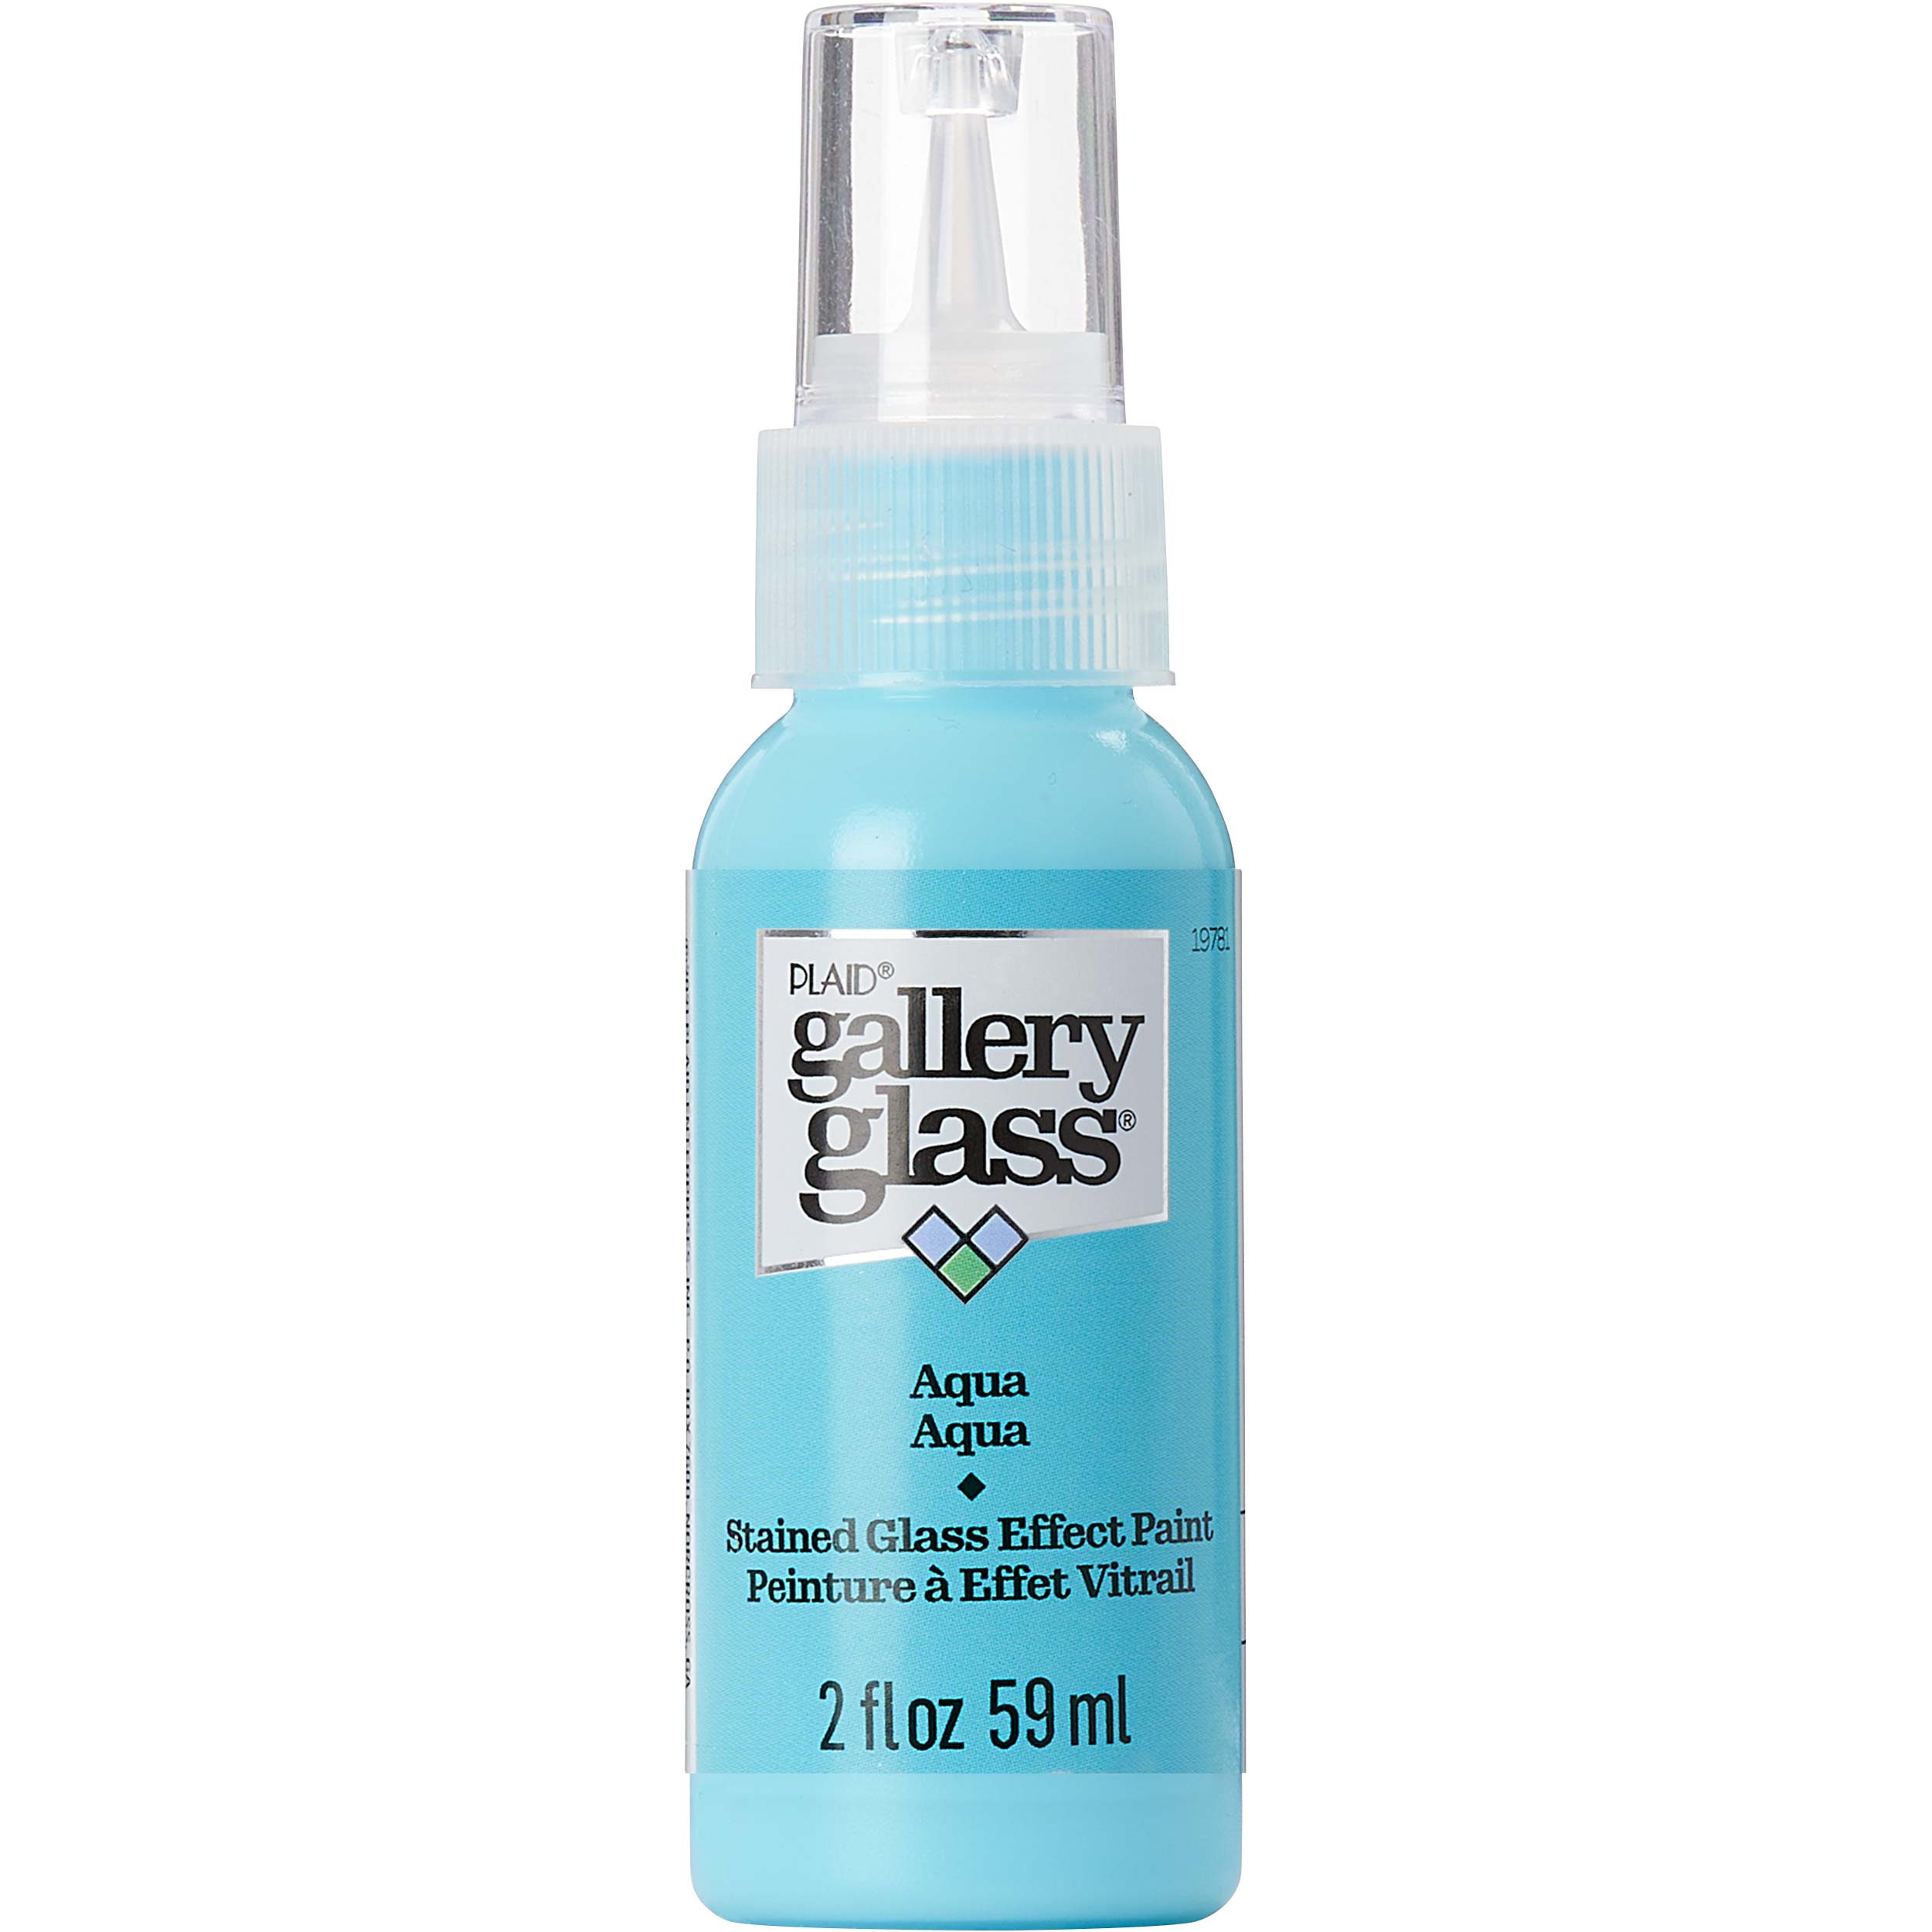  Gallery Glass Stained Glass Paint, Turquoise 2 fl oz Brilliant  Smooth Finish Paint, Perfect For Easy To Apply DIY Arts And Crafts, 19732